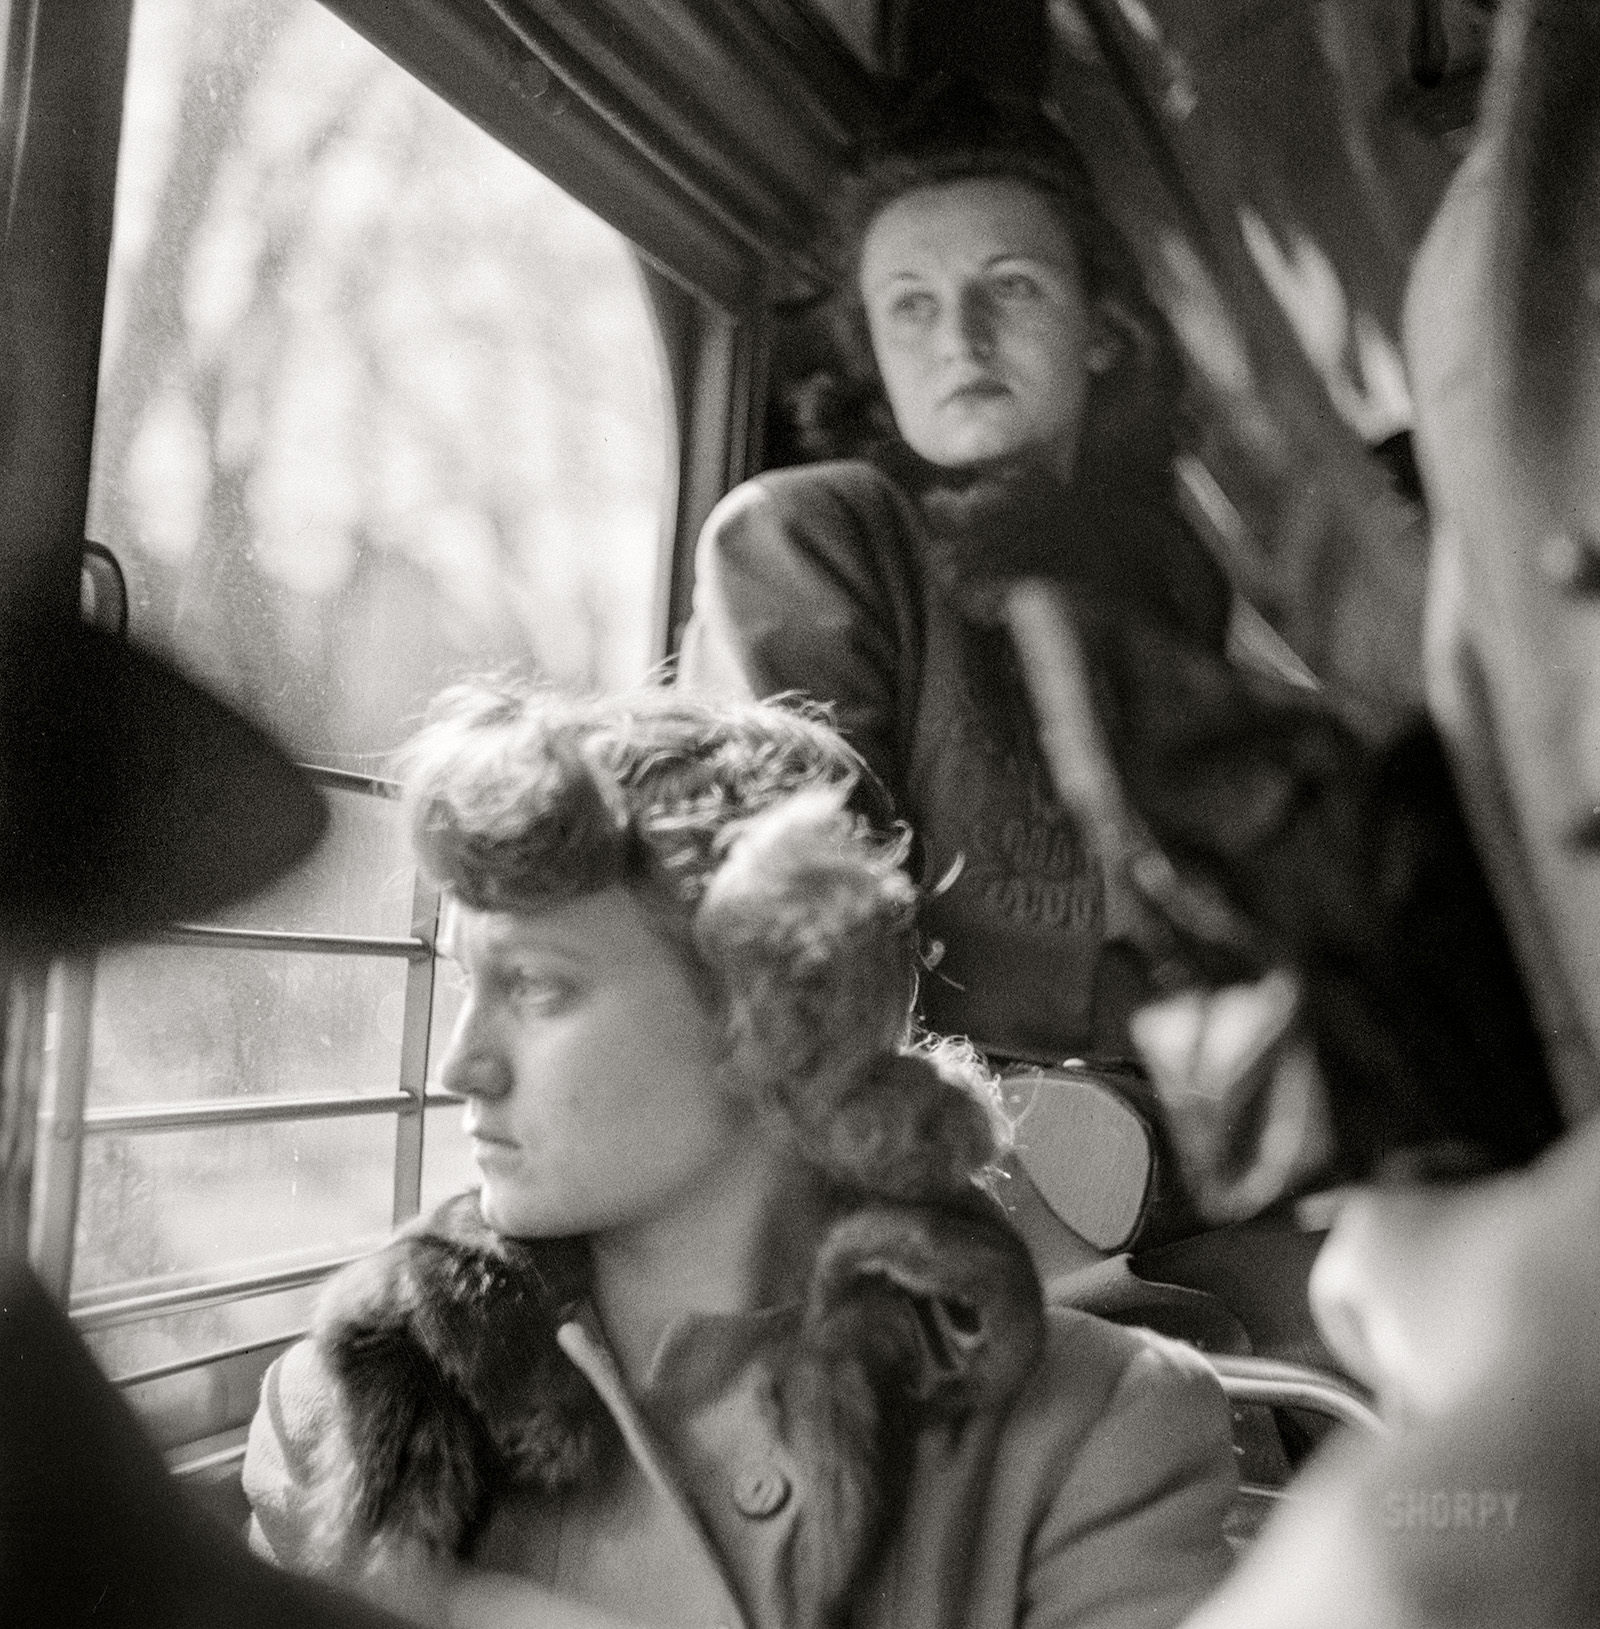 March 1943. "Washington, D.C. Riding on a streetcar." Medium format nitrate negative by Esther Bubley for the Office of War Information. View full size.